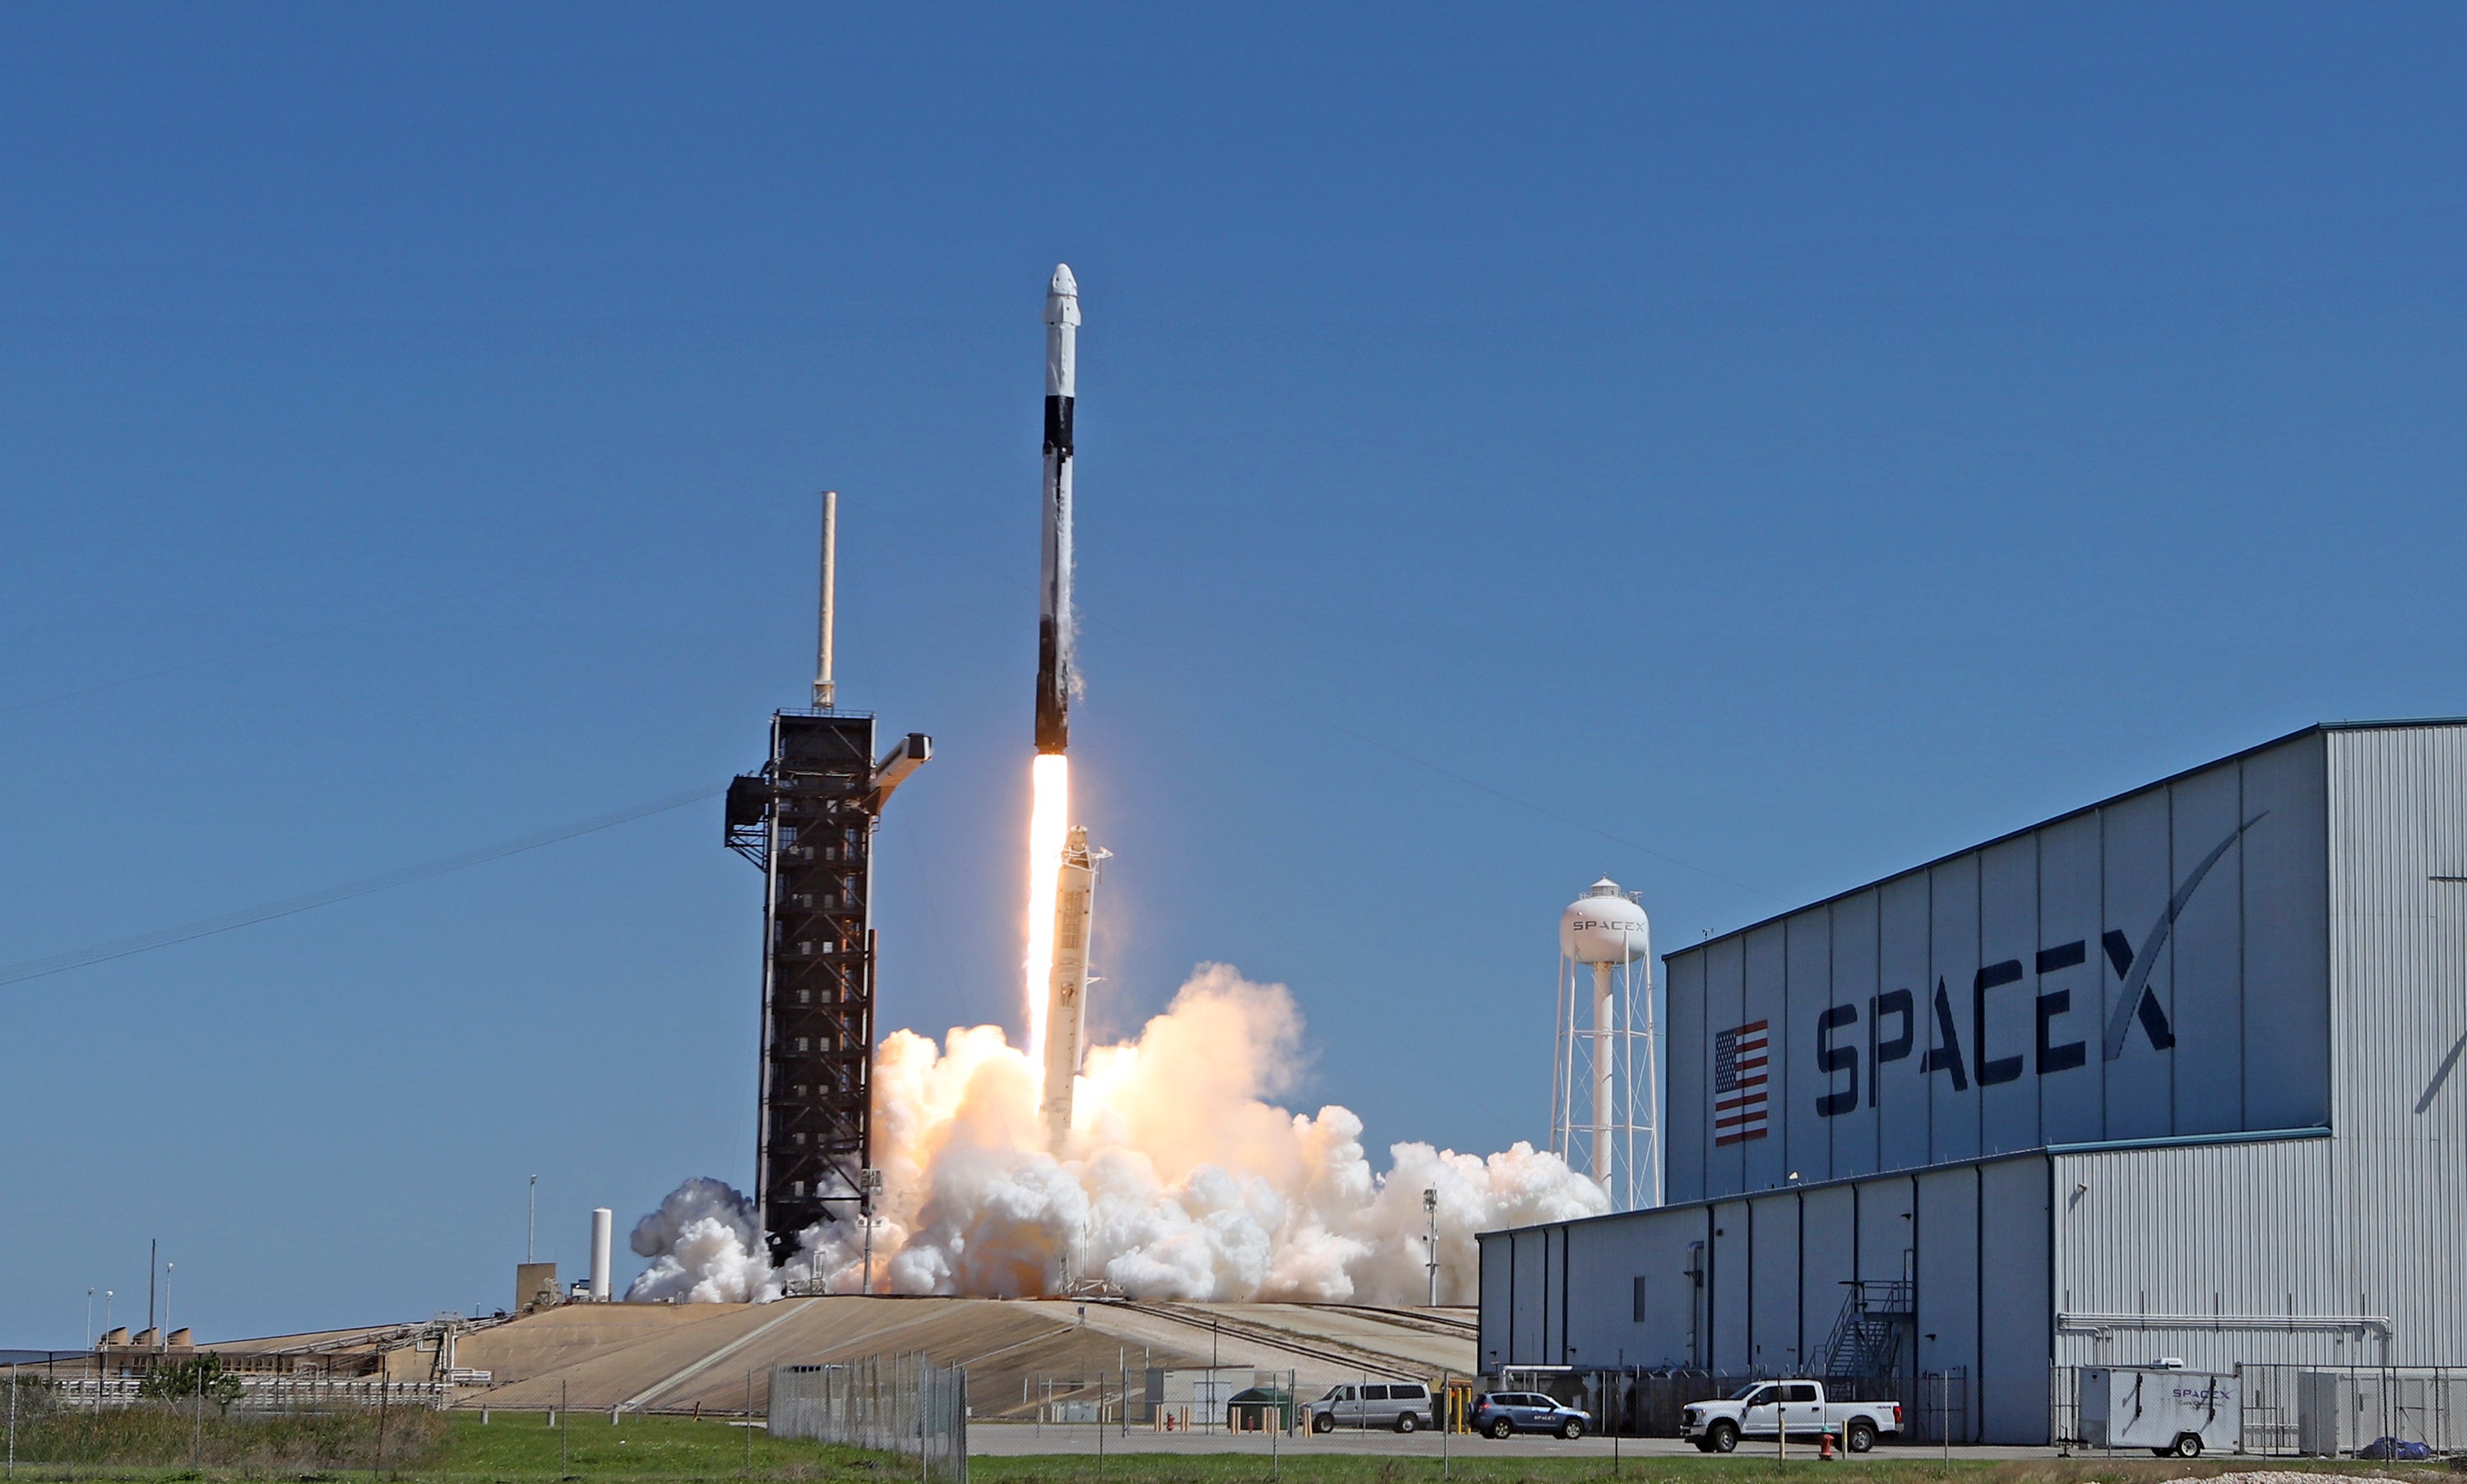 A SpaceX Falcon 9 rocket lifts off from launch complex 39A carrying the Crew Dragon spacecraft on a commercial mission managed by Axion Space at Kennedy Space Center April 8, 2022 in Cape Canaveral, Florida